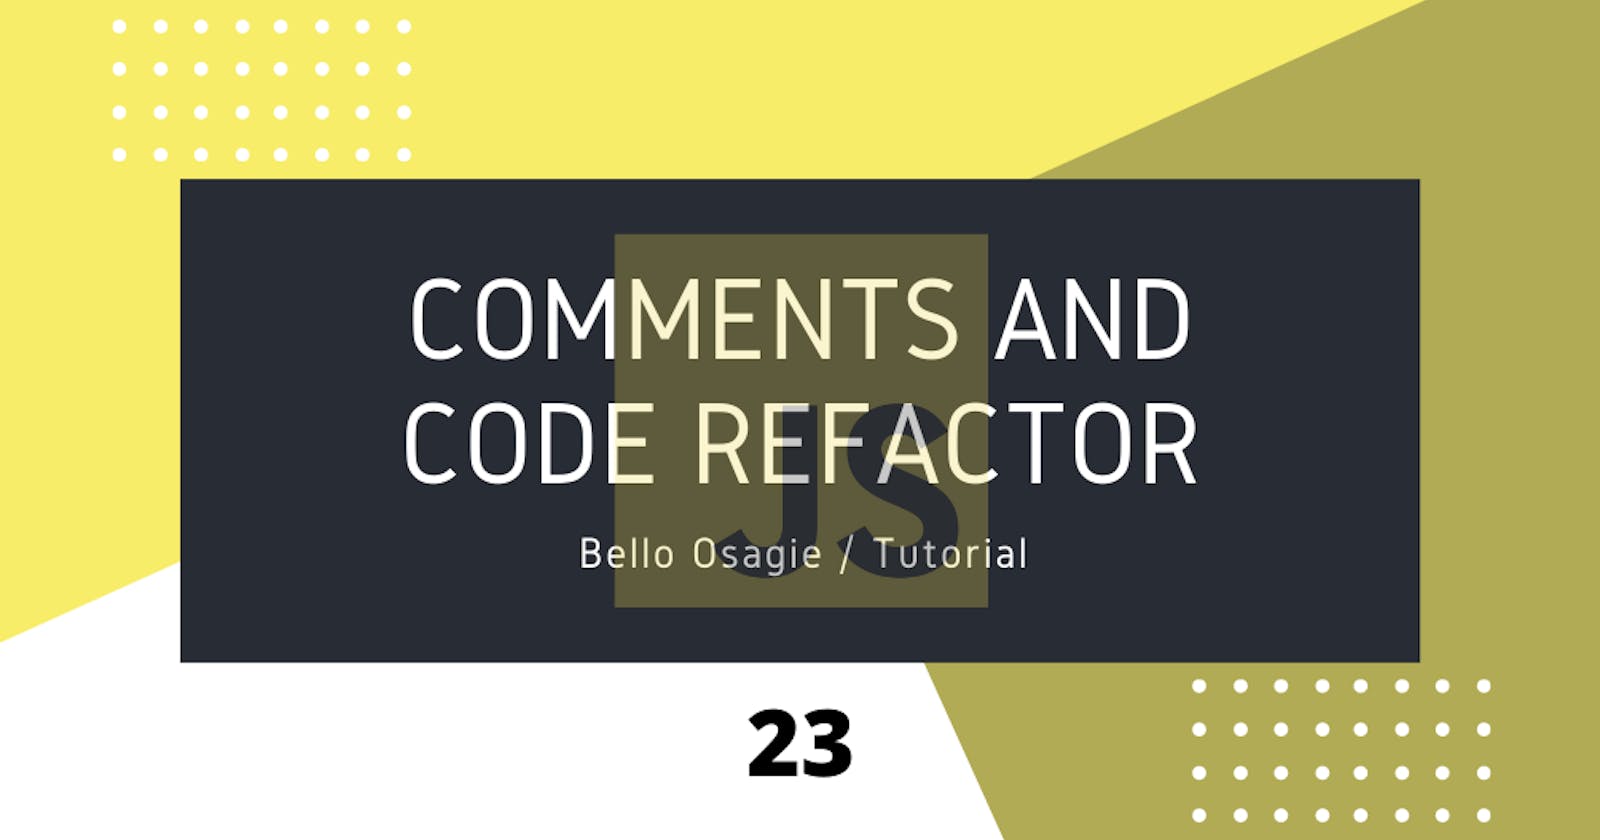 Comments and Code Refactor